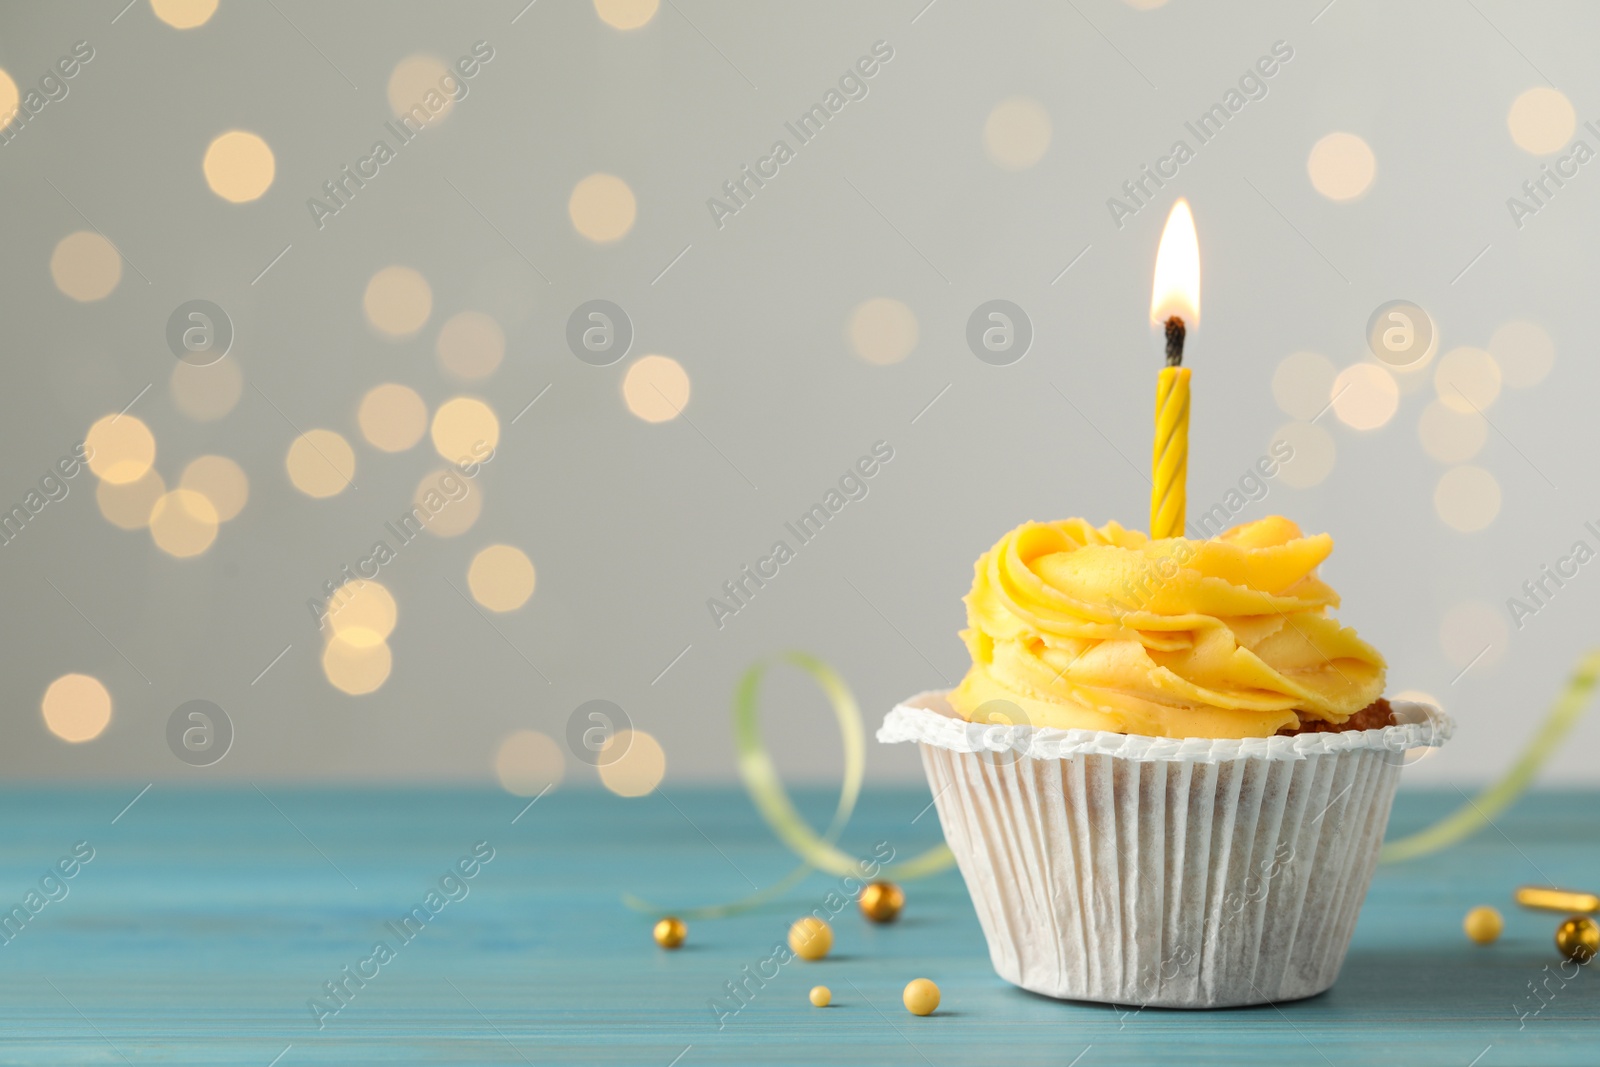 Photo of Tasty birthday cupcake on light blue wooden table against blurred lights. Space for text